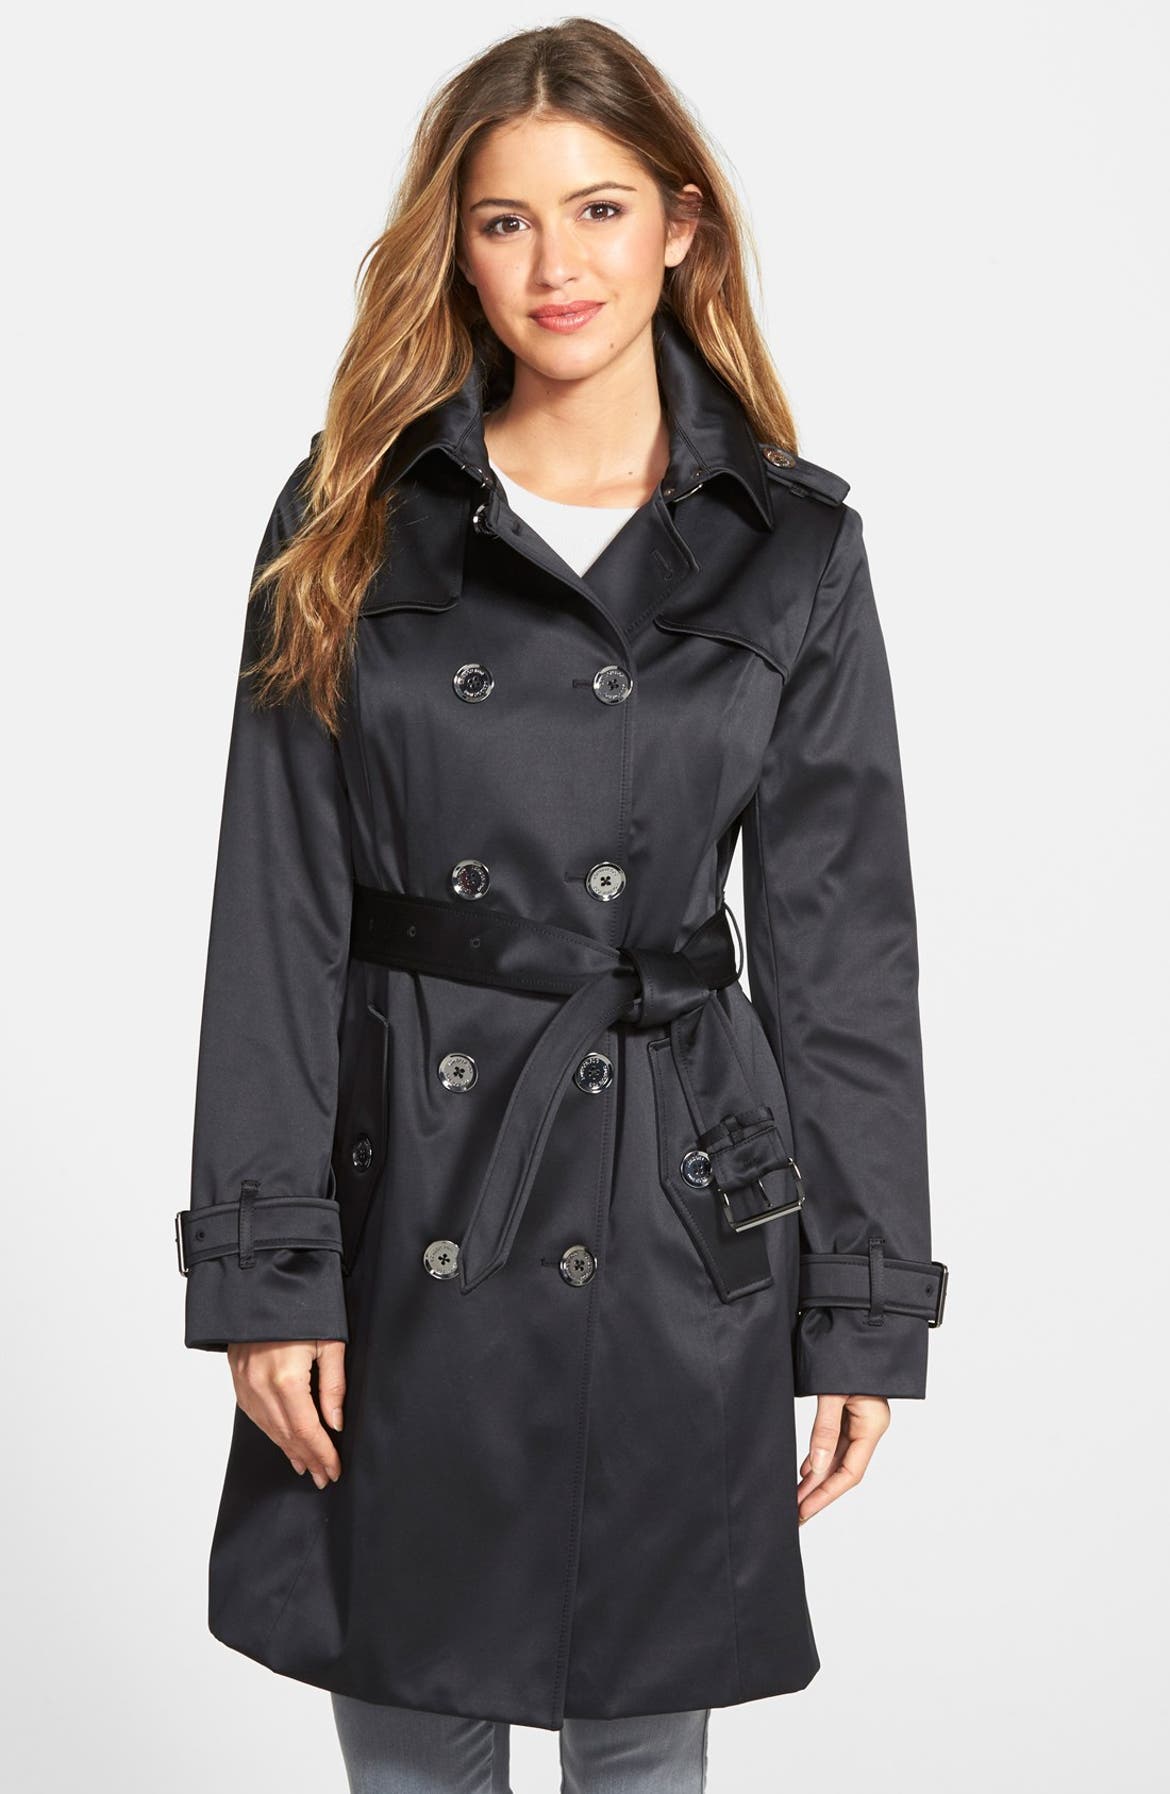 London Fog Heritage Satin Double Breasted Trench Coat | Nordstrom